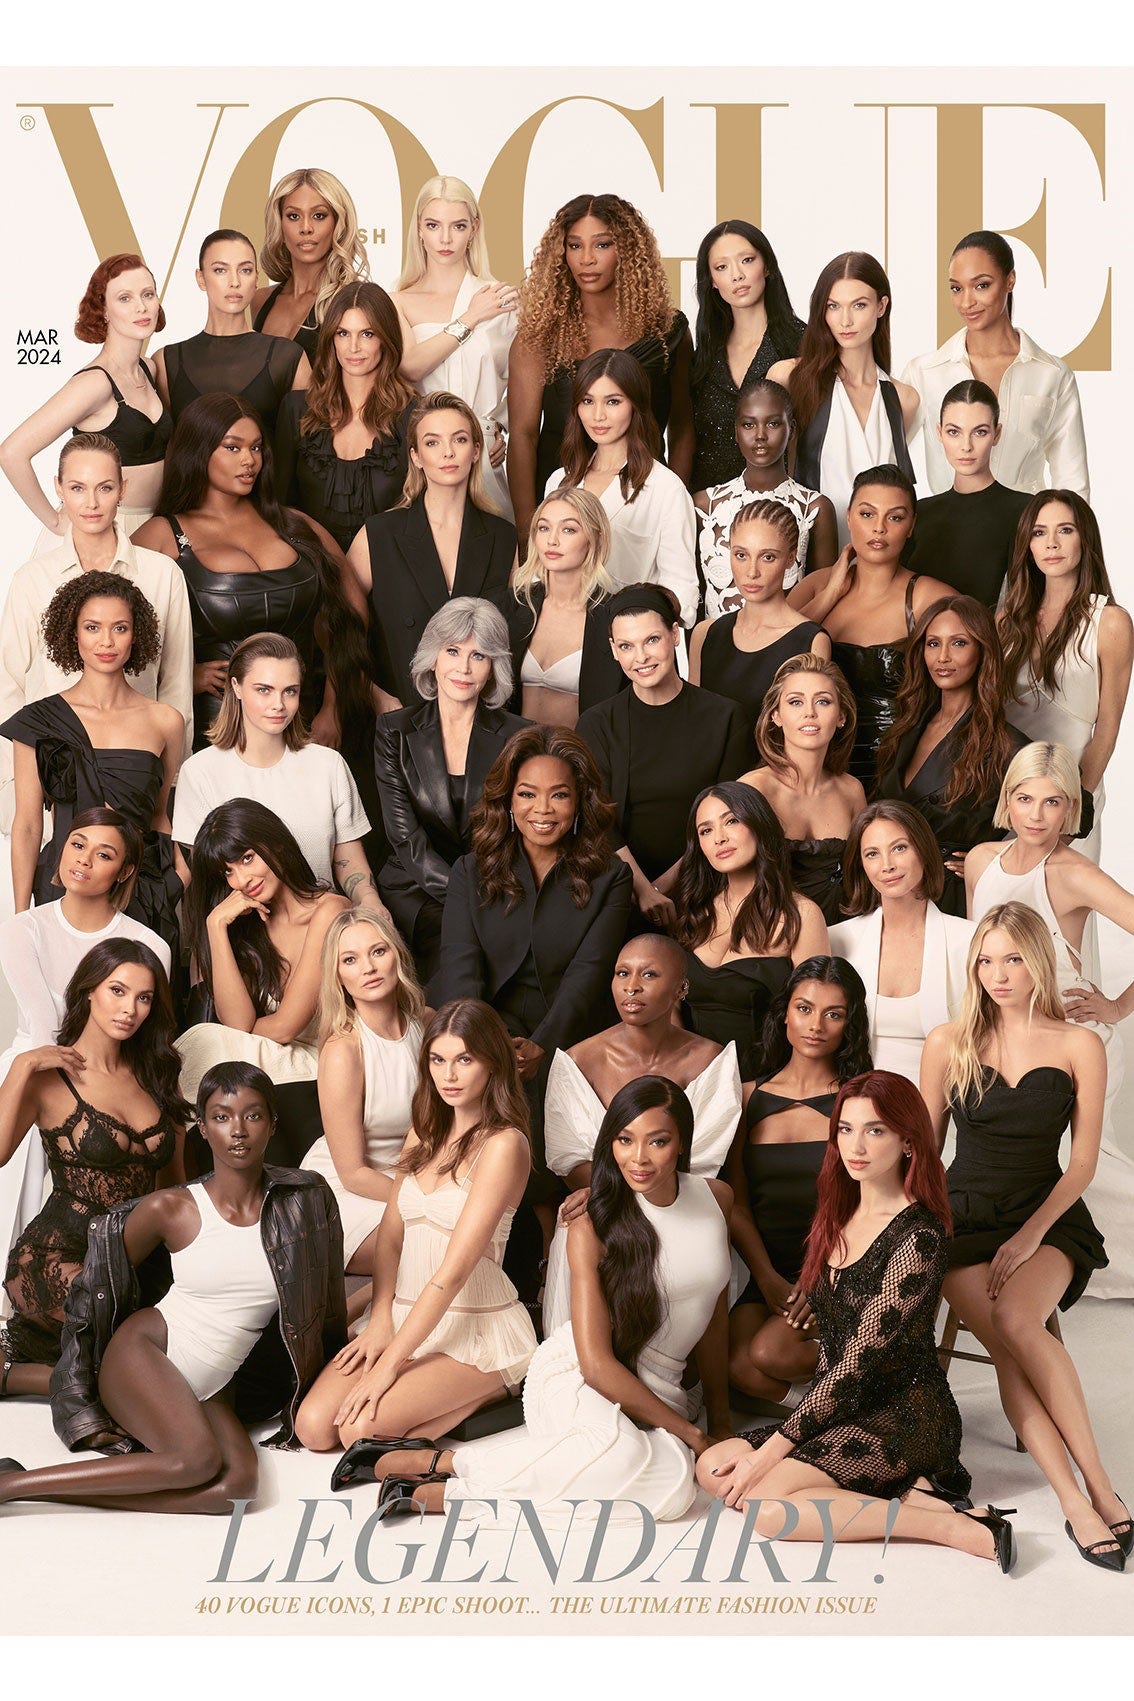 40 Iconic Women Cover The March 2024 Issue Of British Vogue, Edward  Enninful's Last As Editor-In-Chief | British Vogue